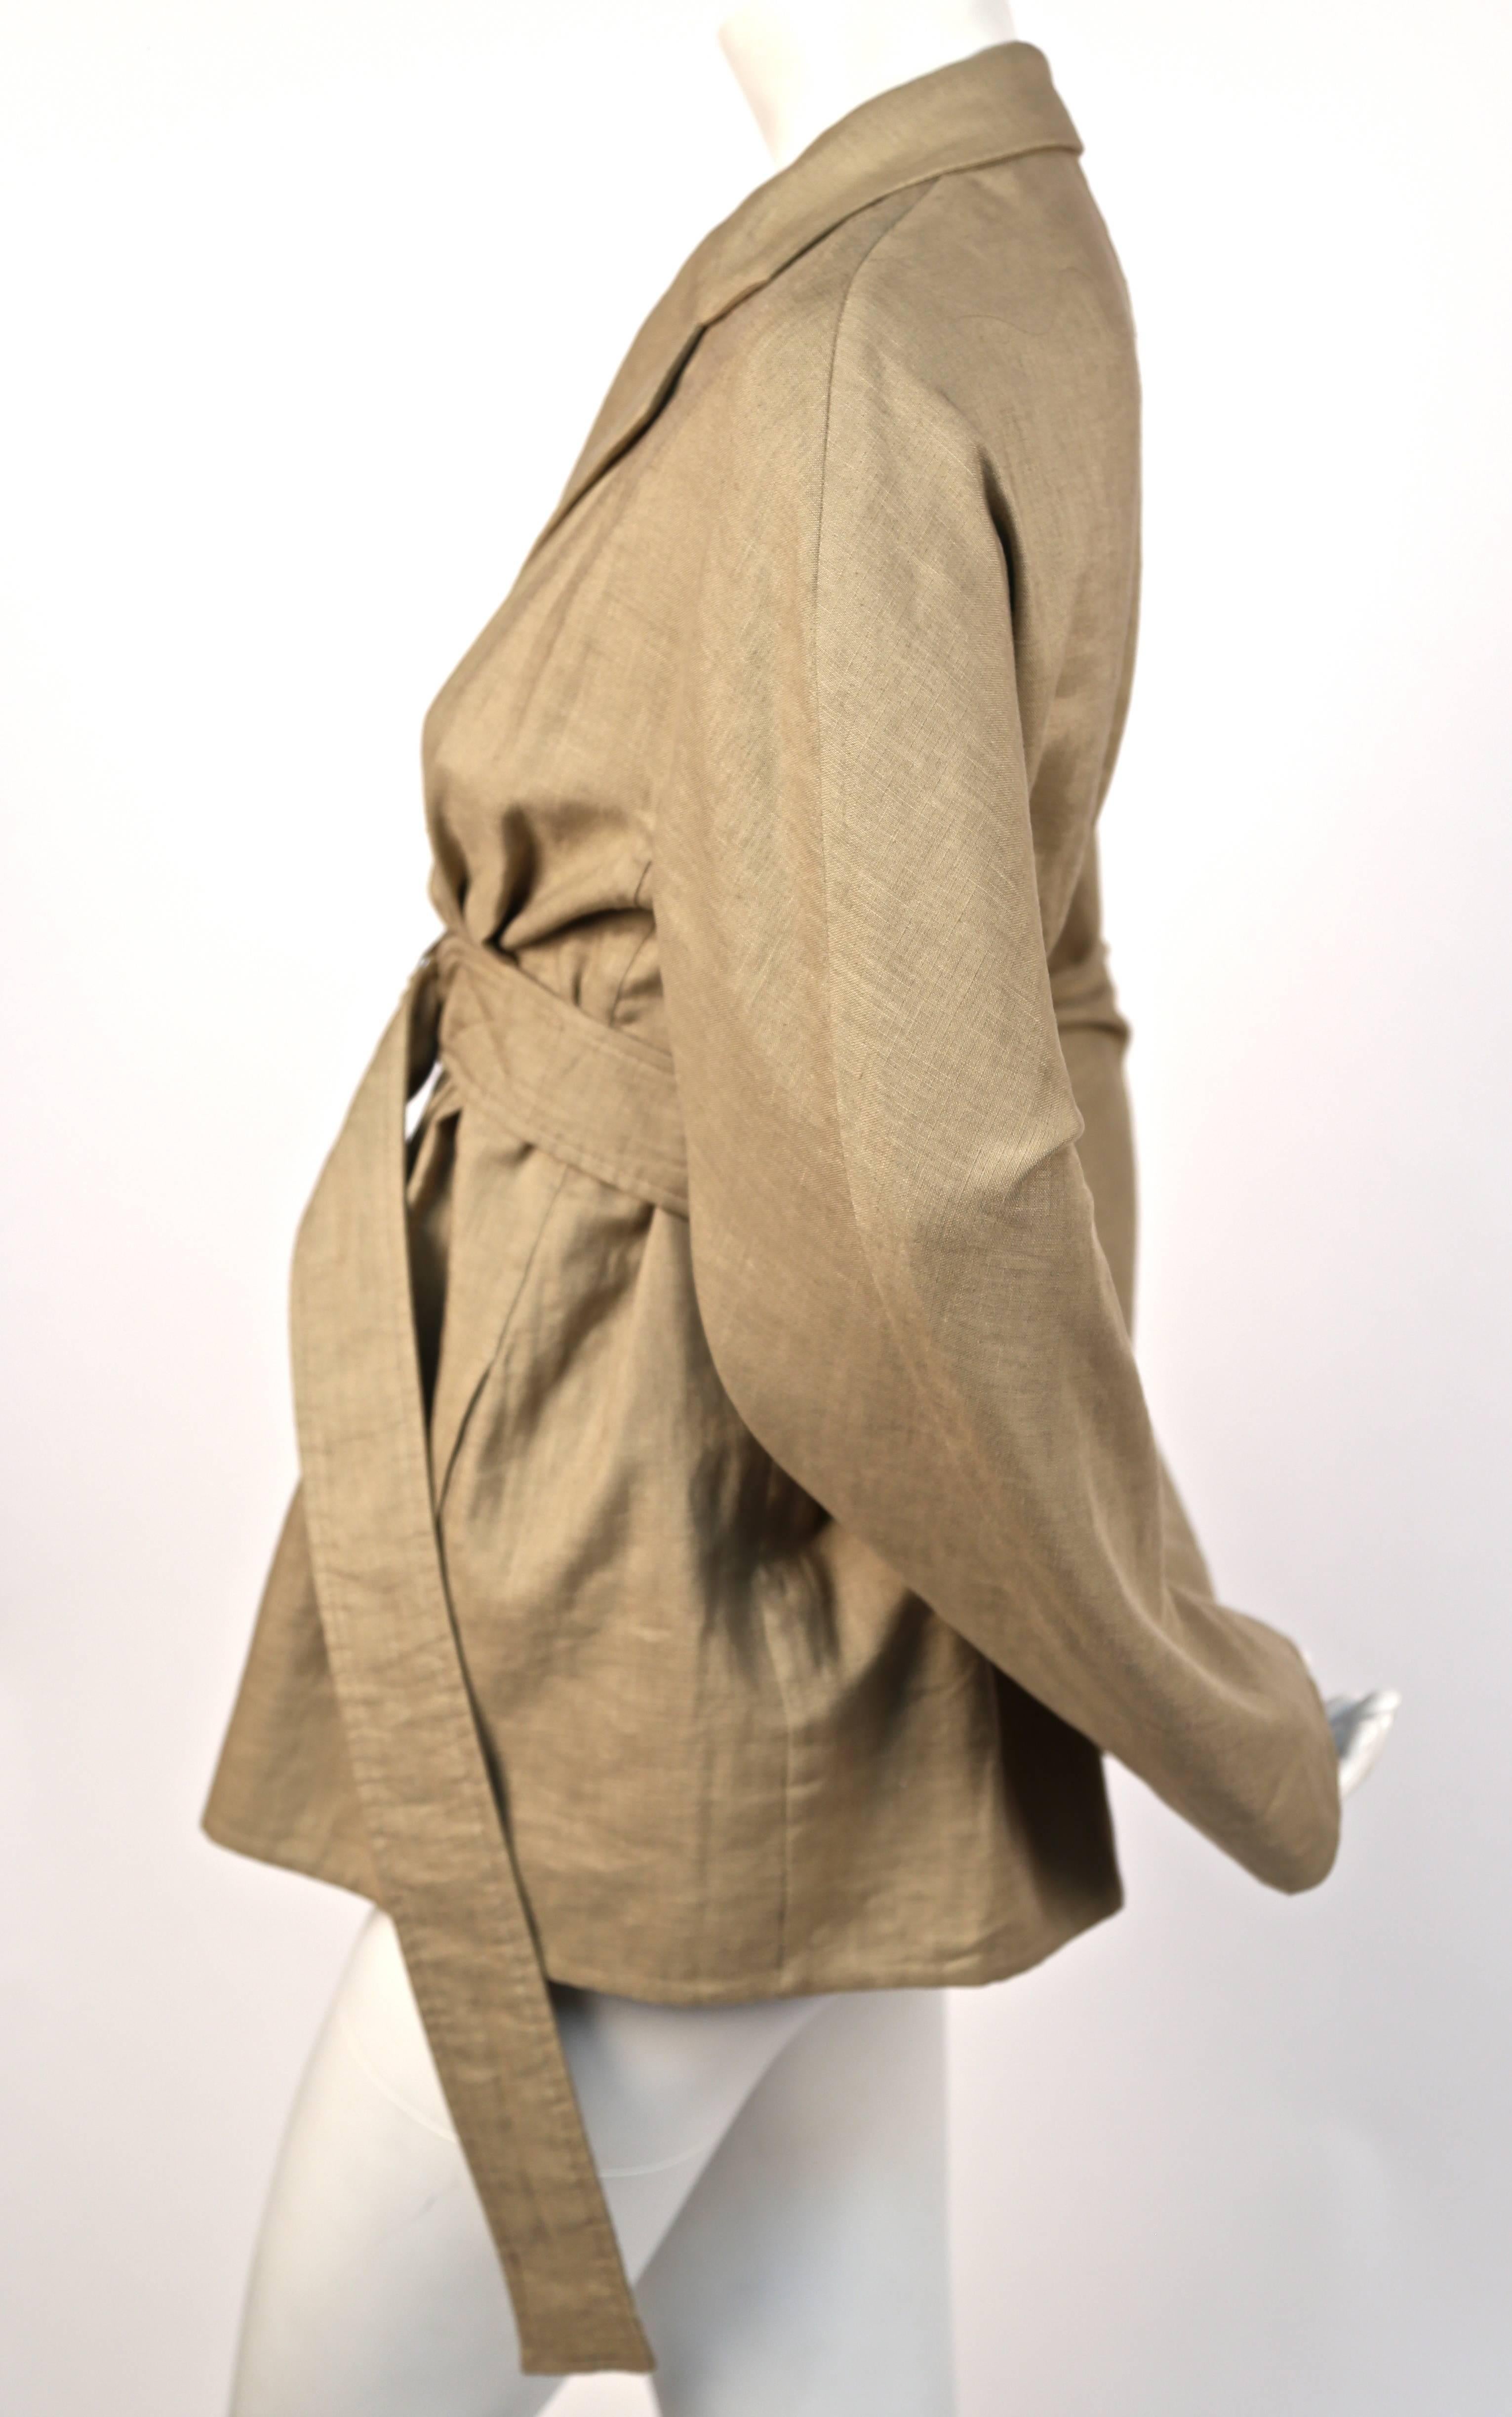 Tan linen jacket with high waist belt designed by Phoebe Philo for Celine dating to resort of 2014. Looks great layered. French size 36. Approximate length 28